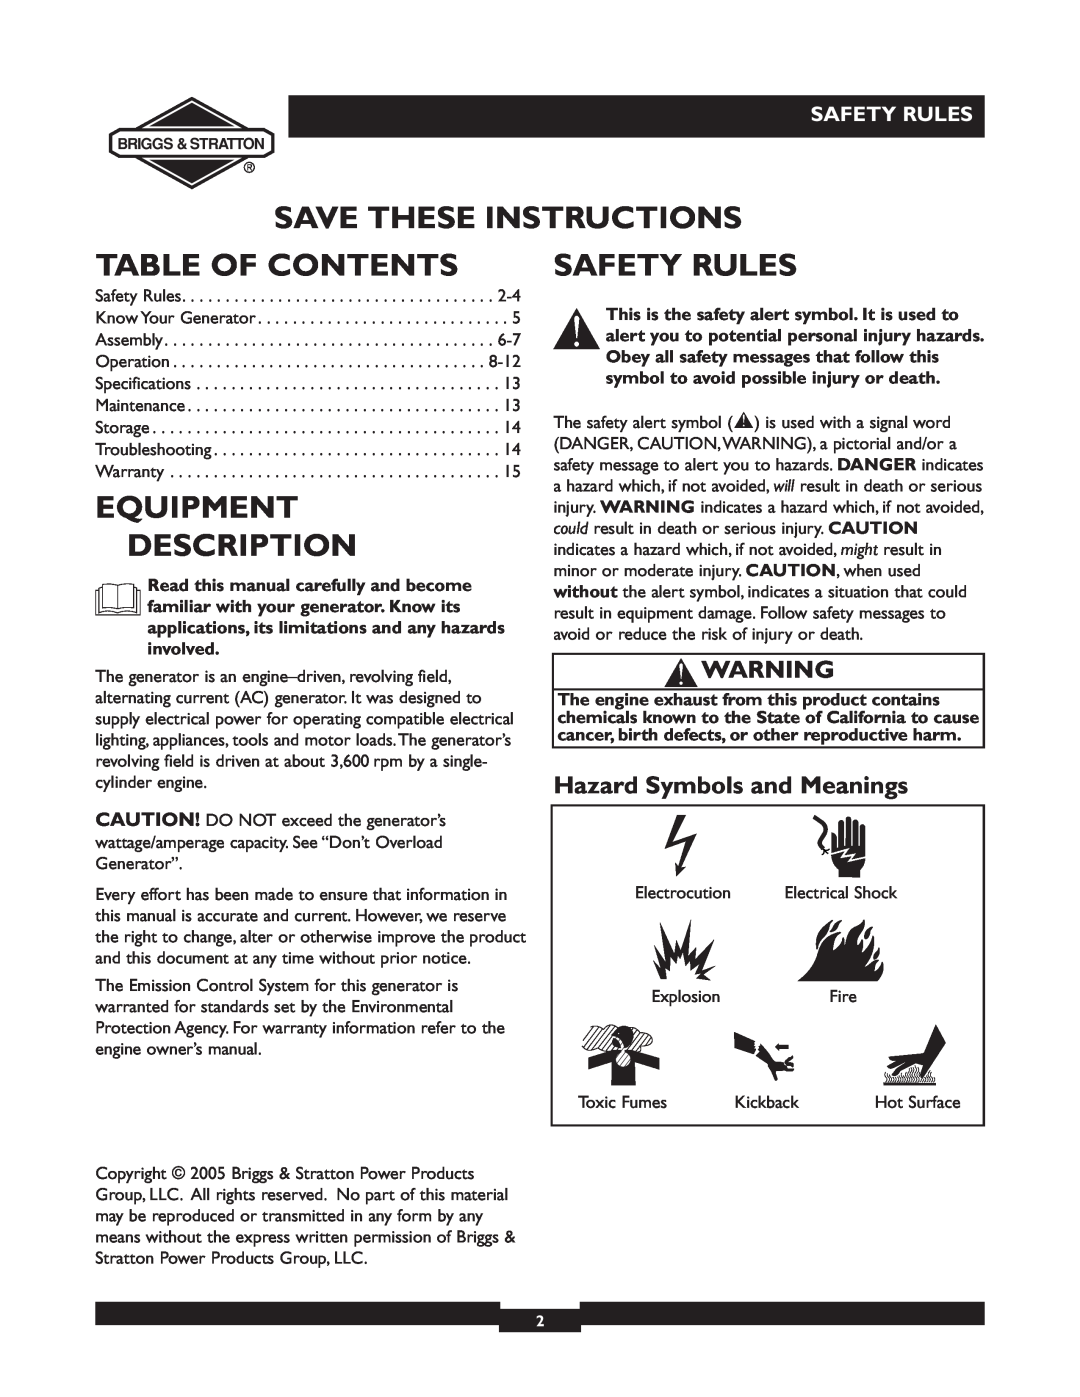 Briggs & Stratton 30238 owner manual Save These Instructions, Table Of Contents, Equipment Description, Safety Rules 